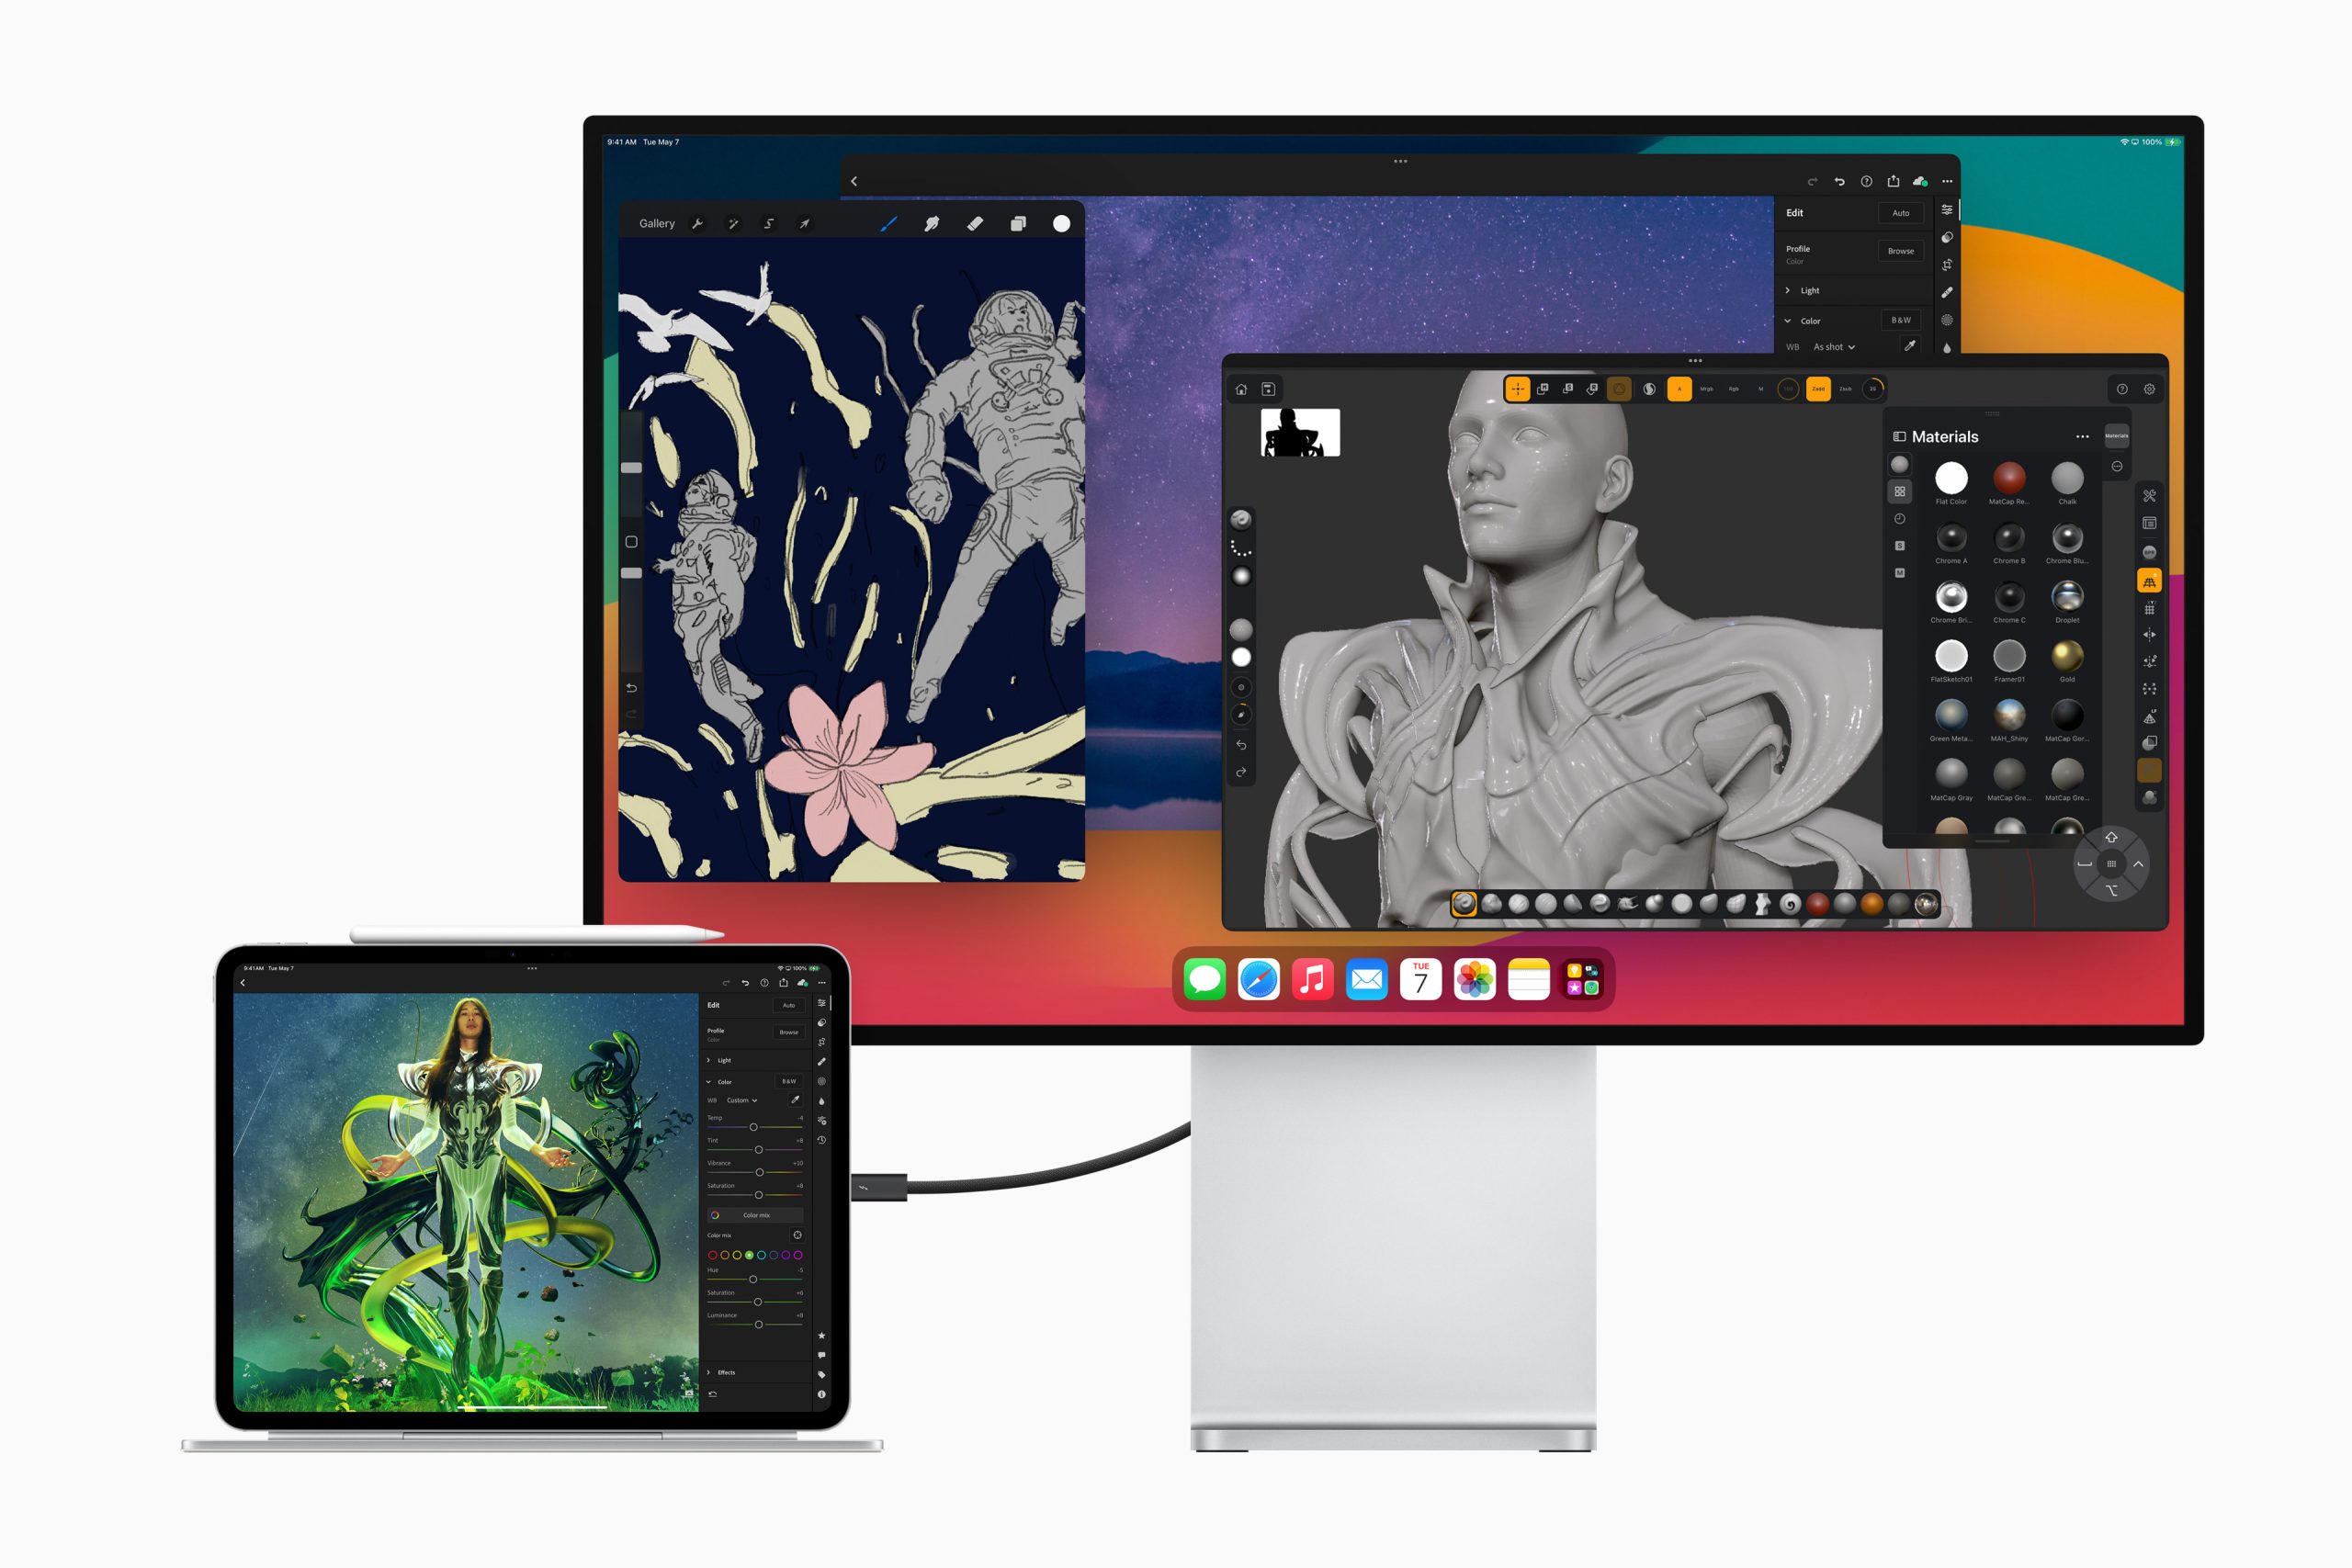 iPad Pro offers ample space for storing large files, high-resolution photos